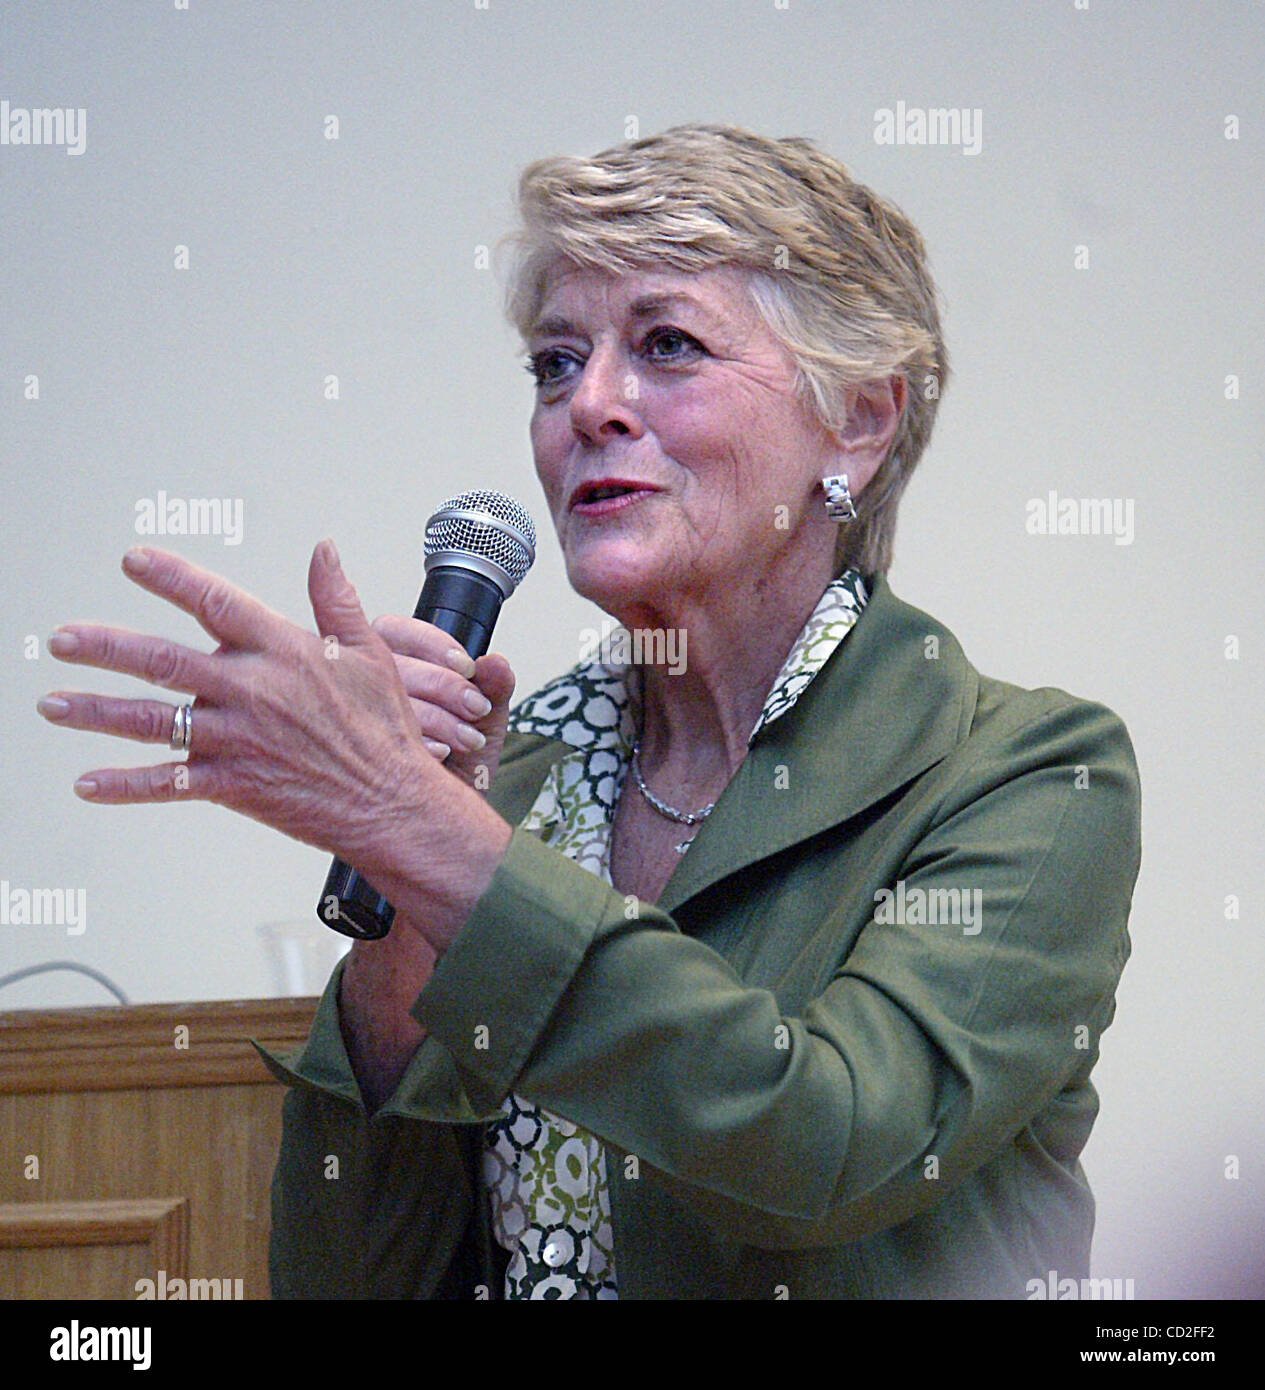 Mar 13, 2008 - Washington, District of Columbia, USA - Former congresswoman and vice-presidential candidate GERALDINE FERRARO, who said she raised about $125,000 for Clinton's campaign, has resigned from Sen. Hillary Clinton's presidential campaign. Ferraro said that Obama's strategist misinterprete Stock Photo